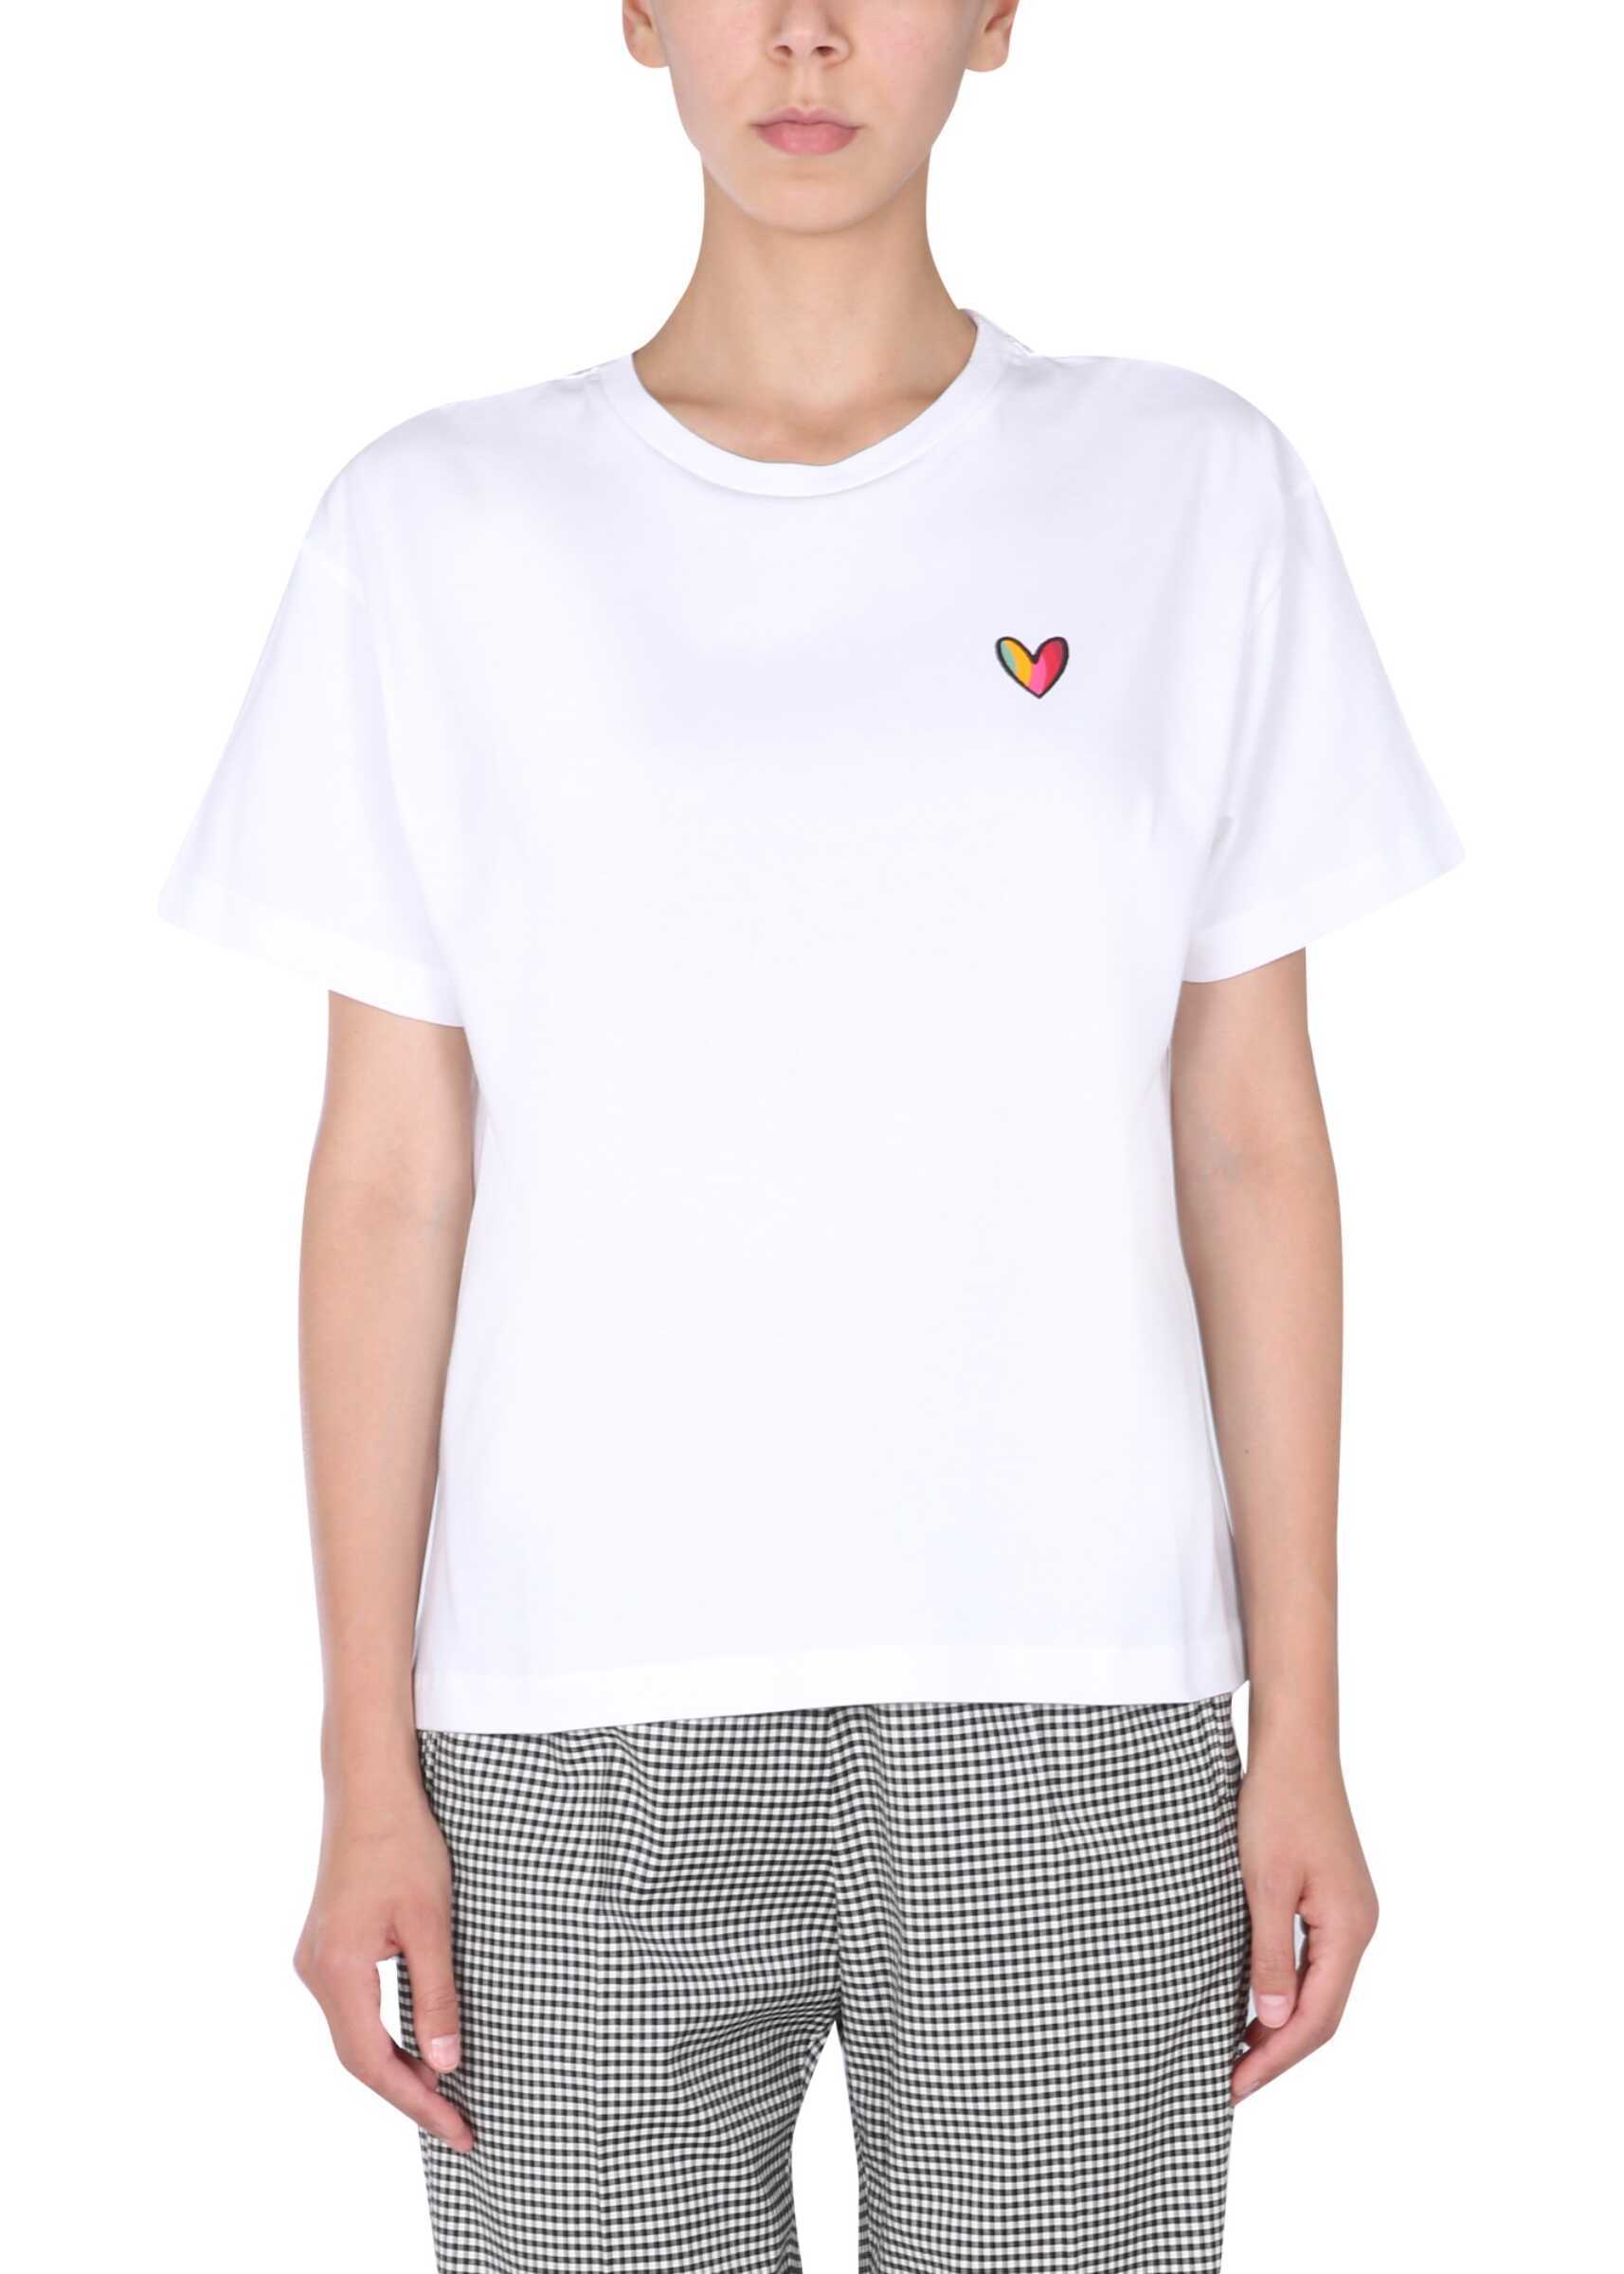 PS by Paul Smith Swirl Heart T-Shirt W2R/031V/FP2530_01 WHITE